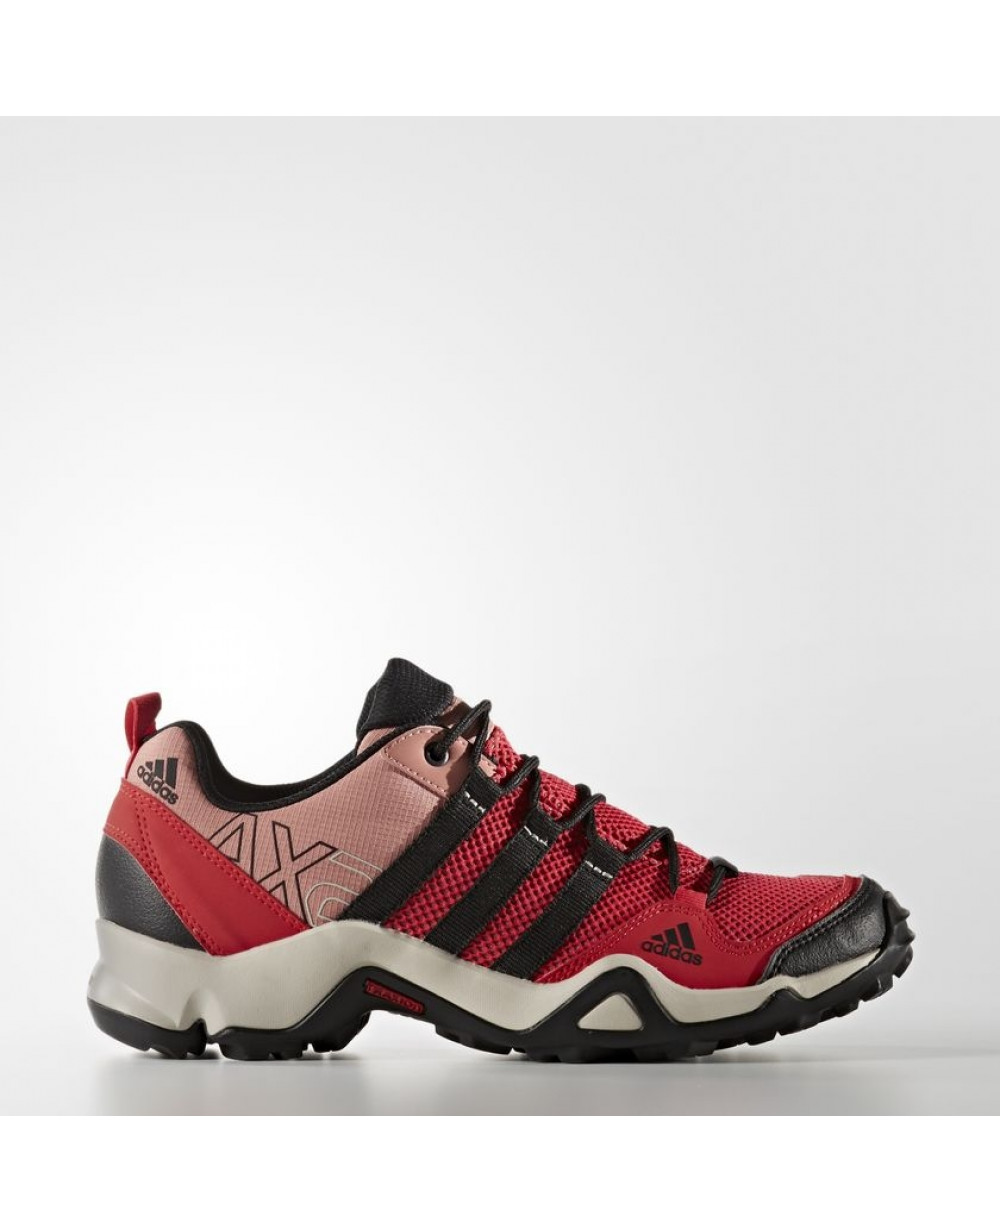 adidas ax2 outdoor shoes